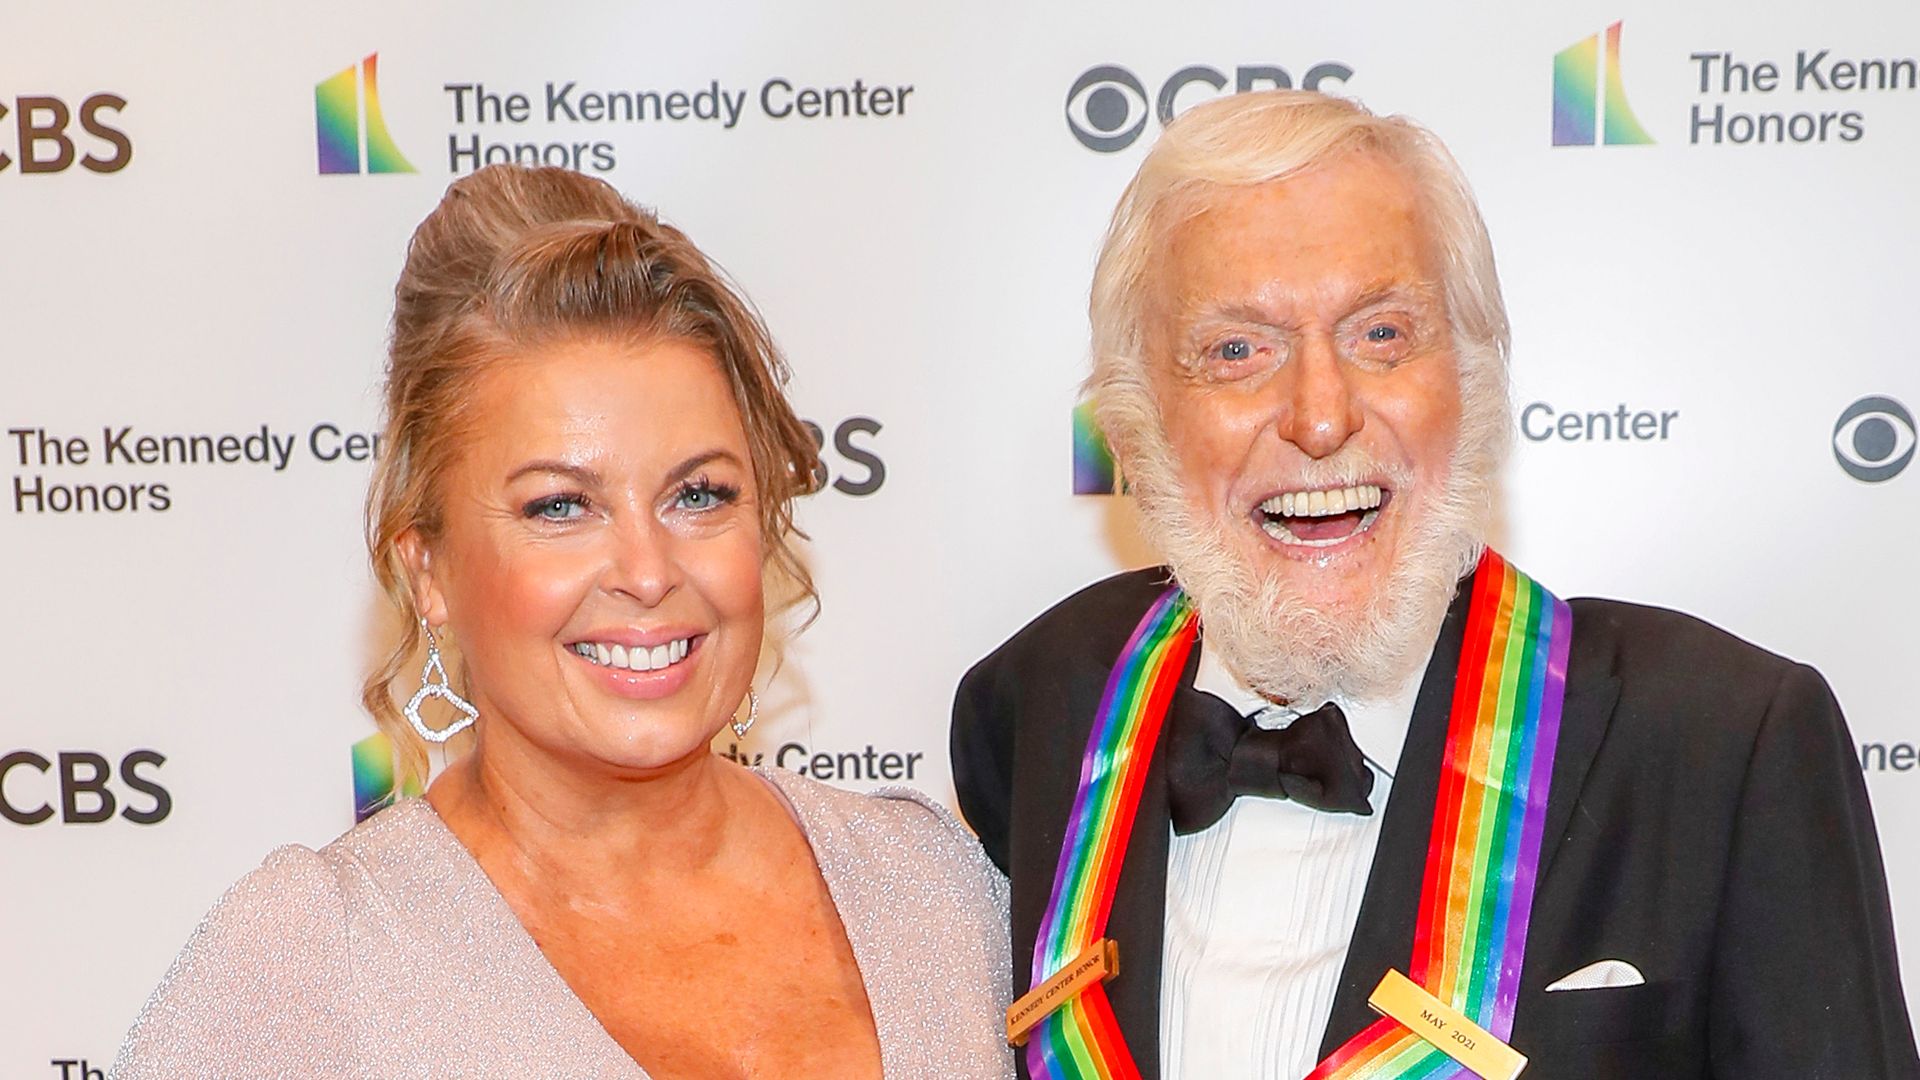 Arlene Silver and Dick Van Dyke attend the 43rd Annual Kennedy Center Honors at The Kennedy Center on May 21, 2021 in Washington, DC.